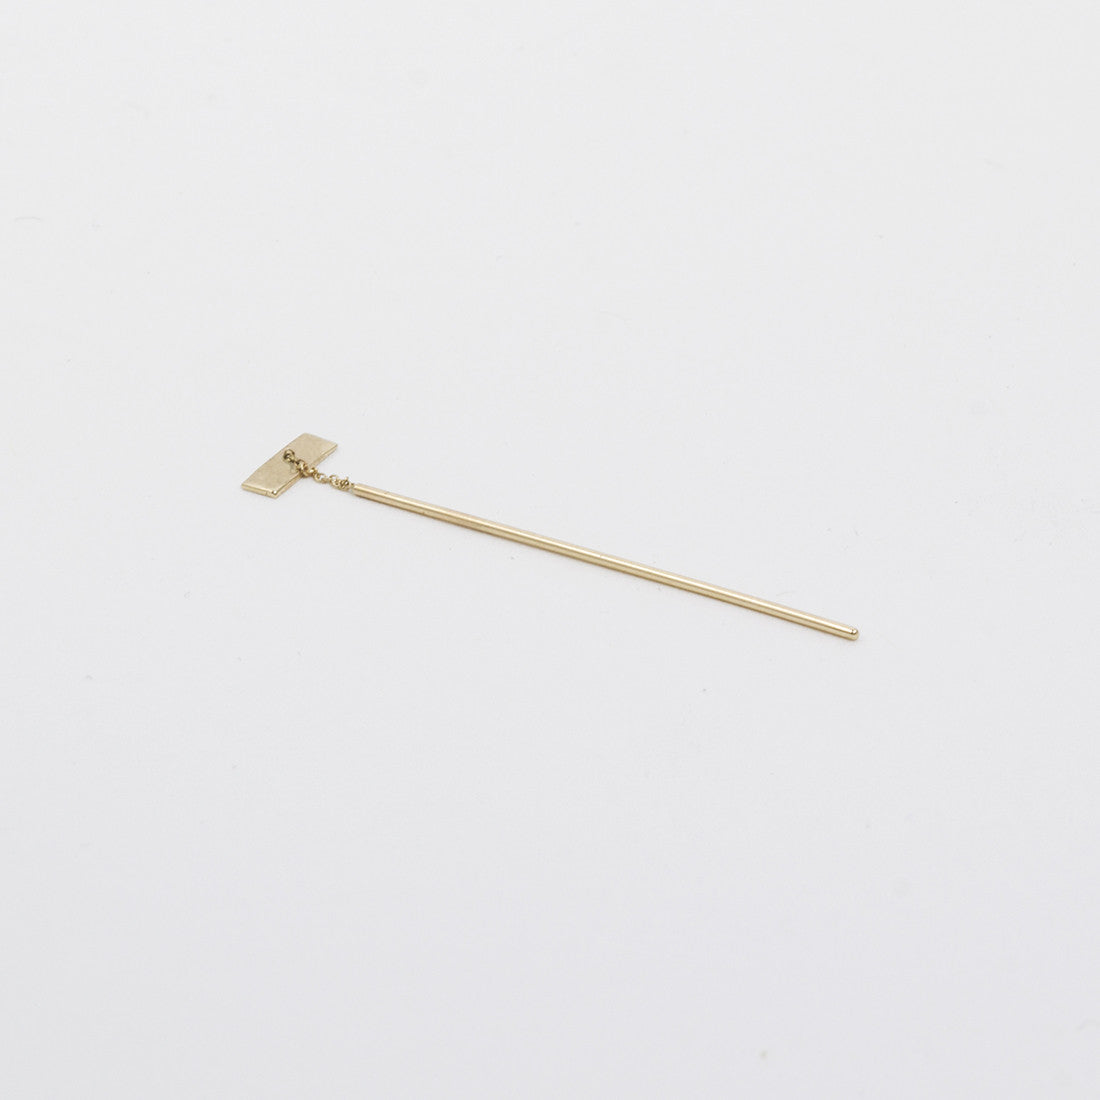 Tili Long Cool Pull Through Earring in 14k Gold By SHW Fine Jewelry NYC